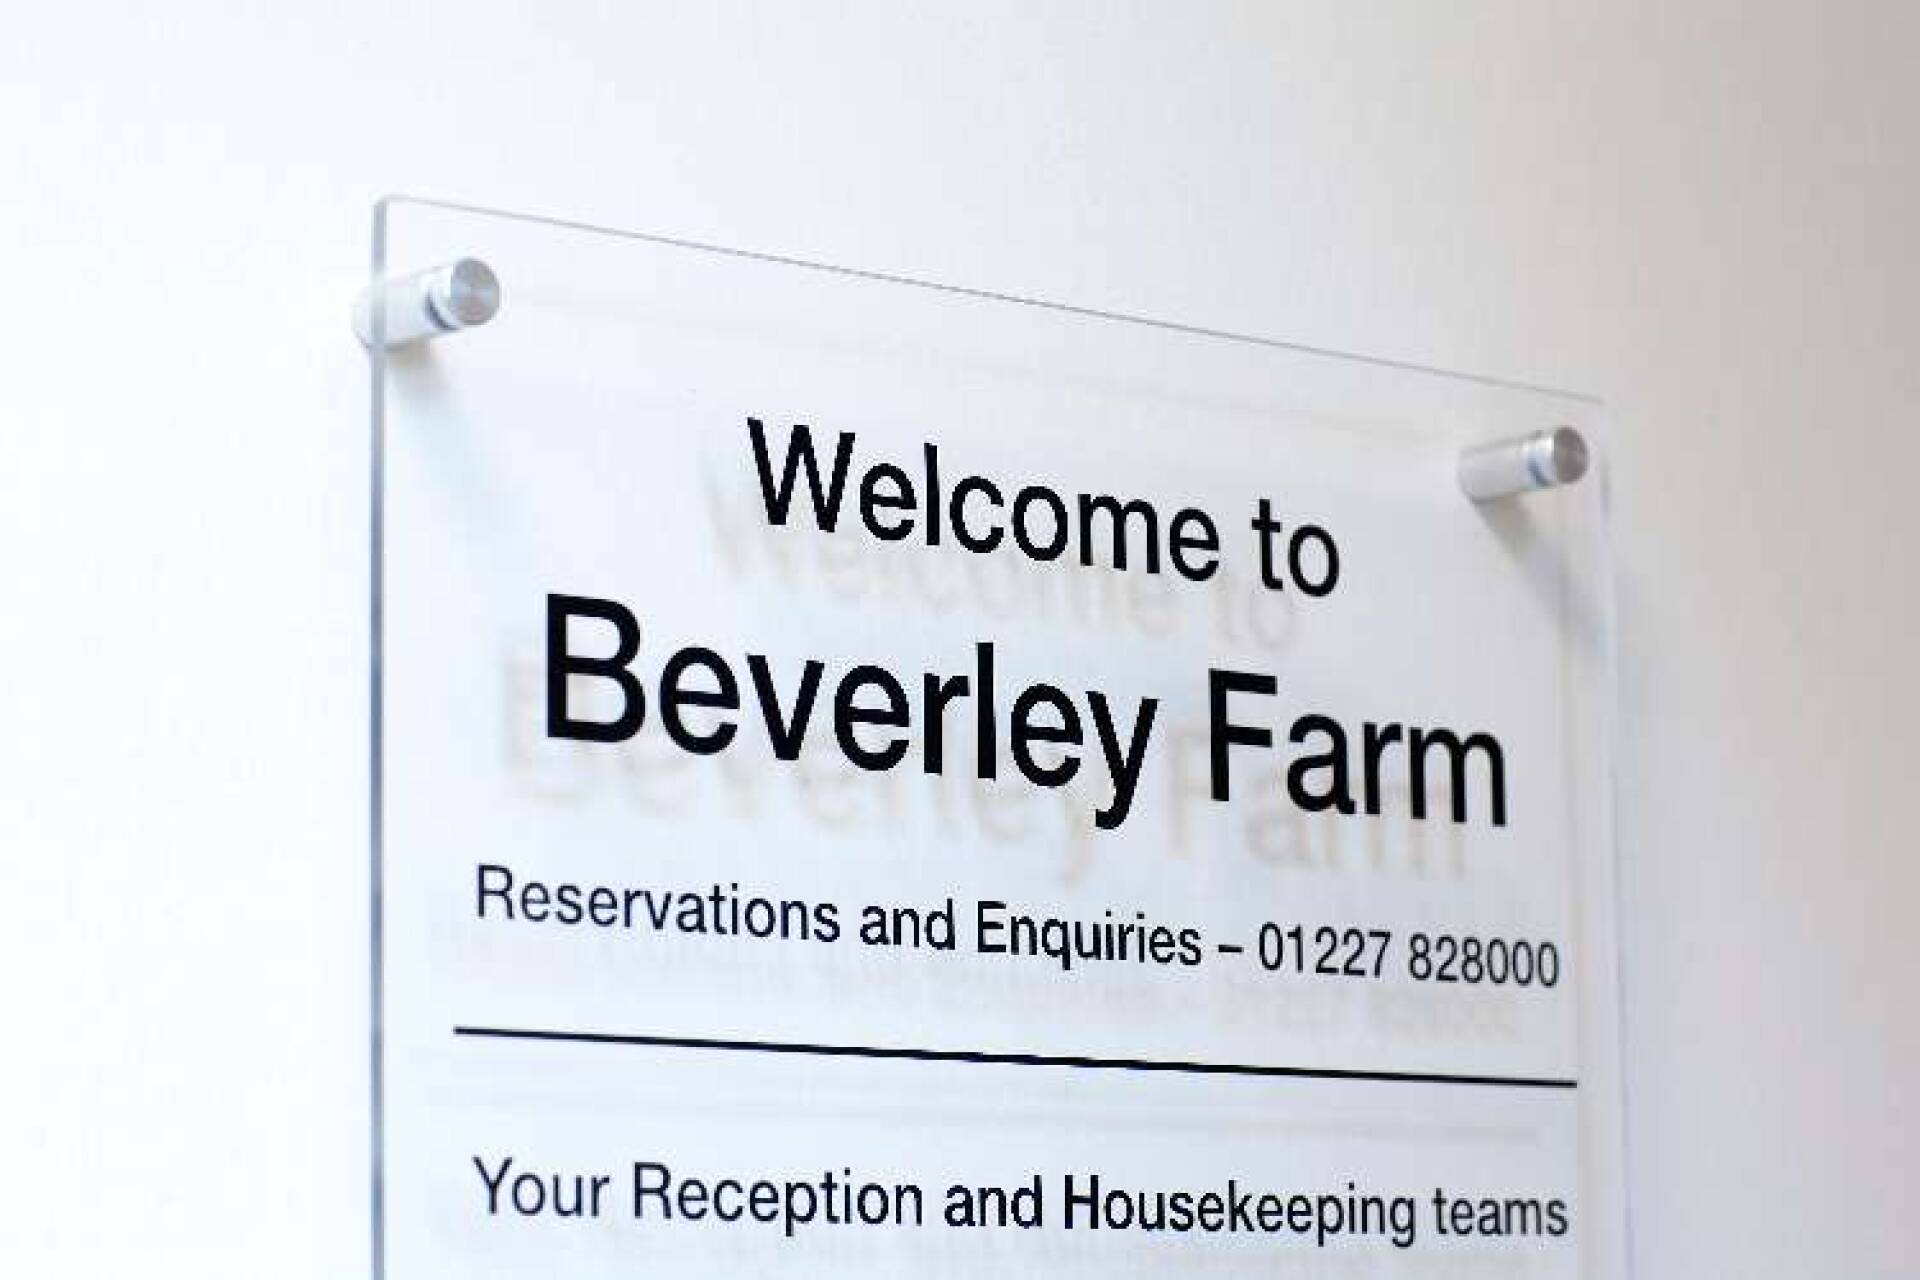 Welcome to Beverley Farm sign